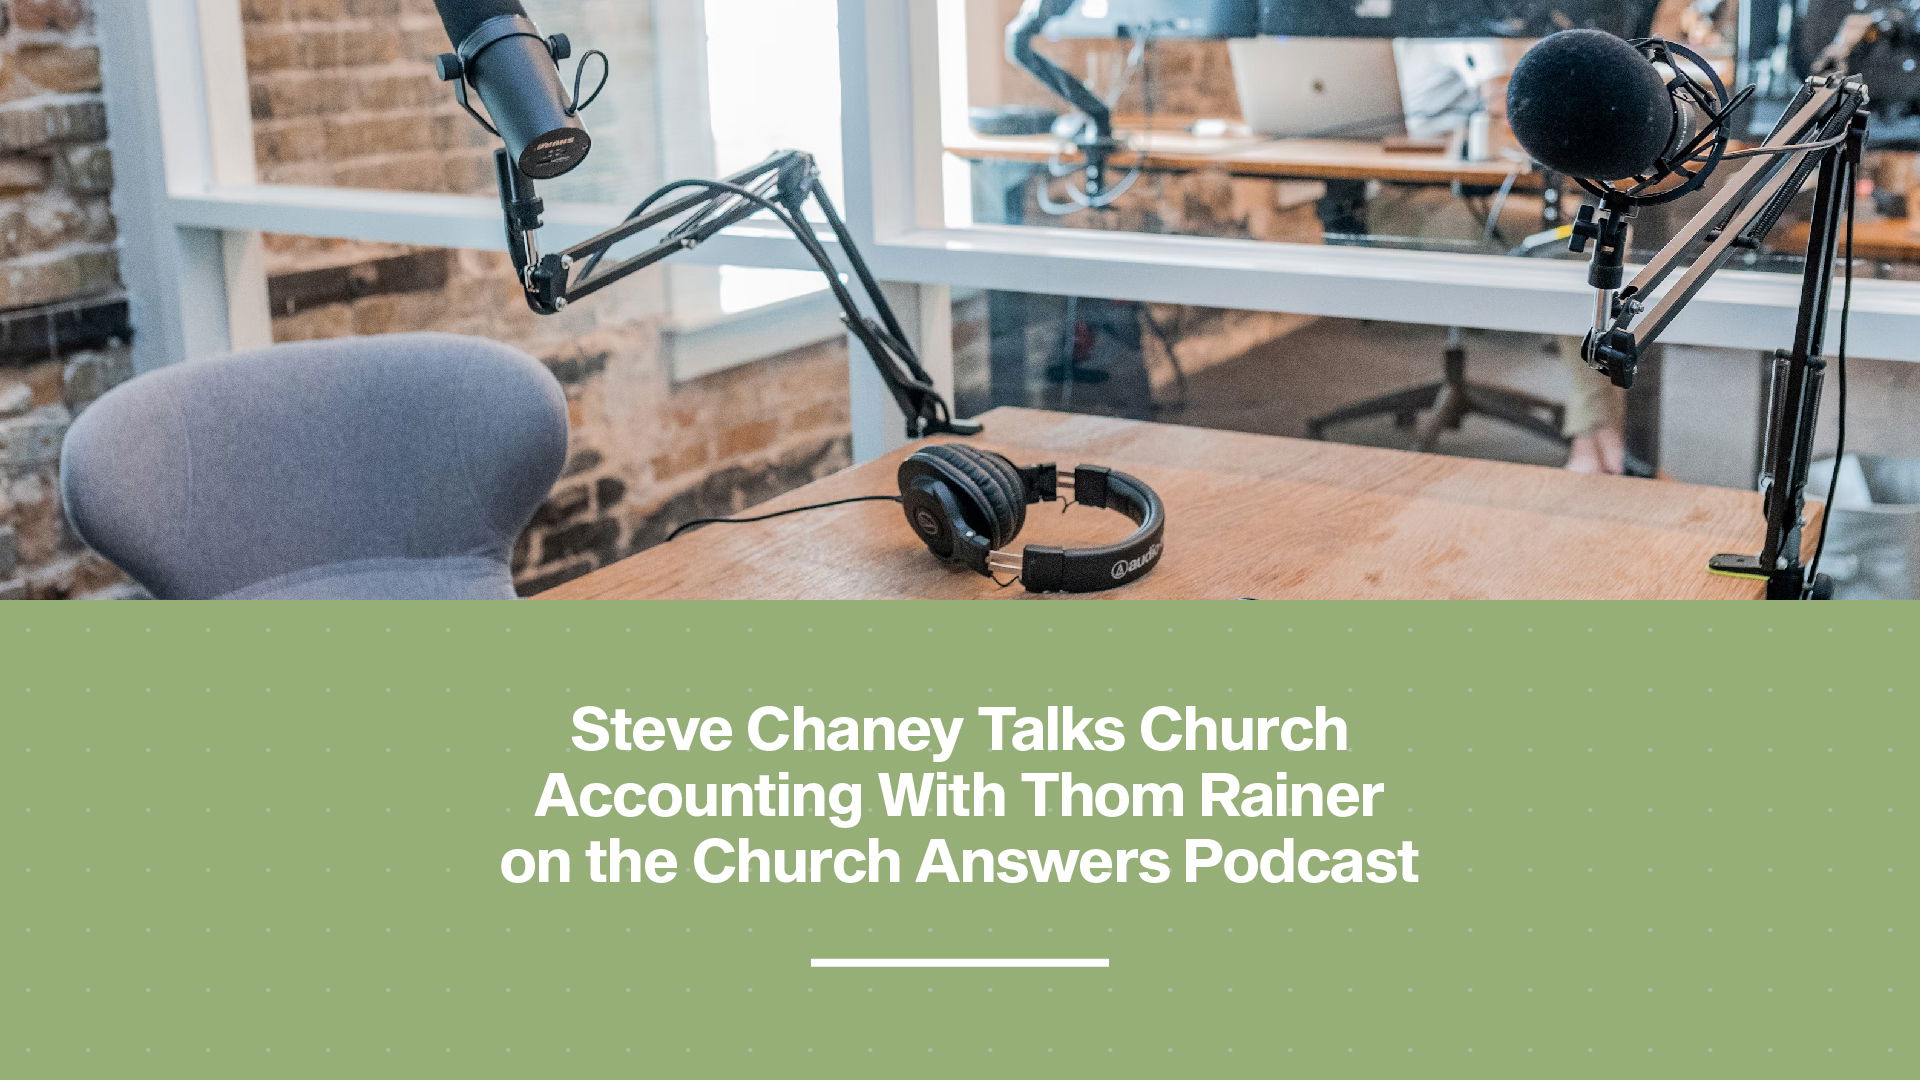 Steve Chaney joins Thom Rainer to discuss key church accounting questions across a 3-episode run of the Church Answers Podcast.